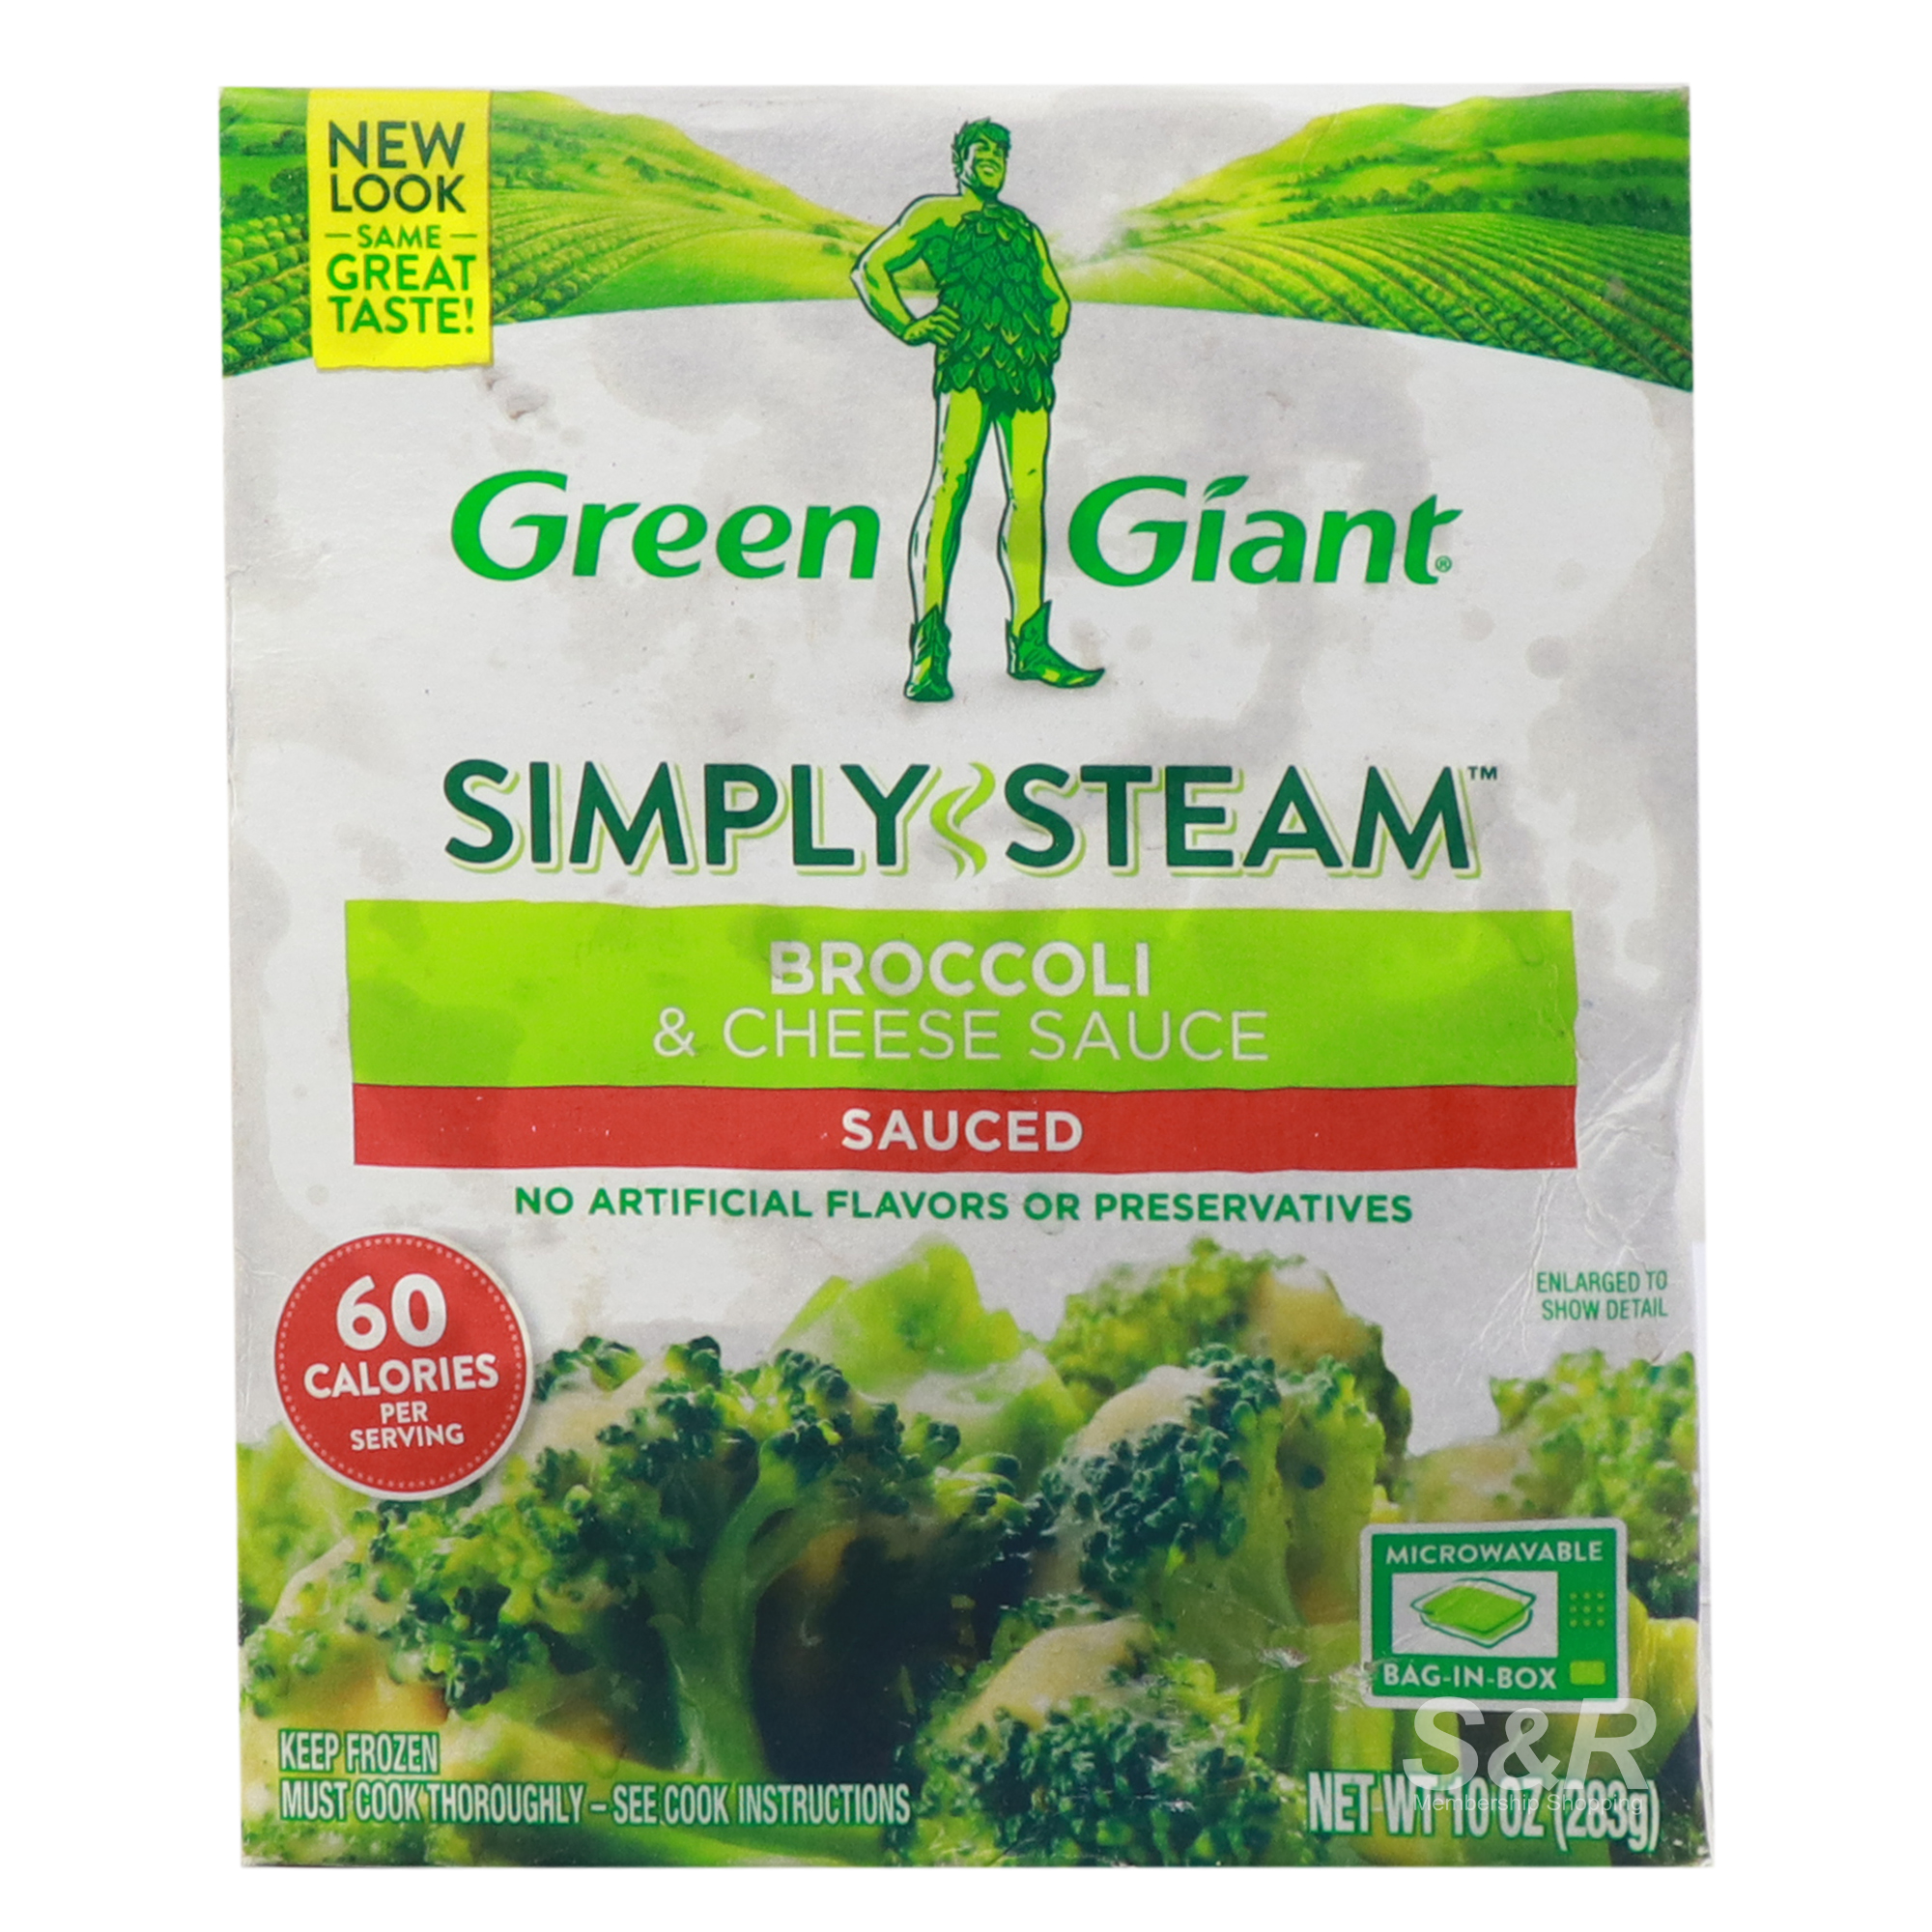 Green Giant Simply Steam Broccoli and Cheese Sauce Meal 283g